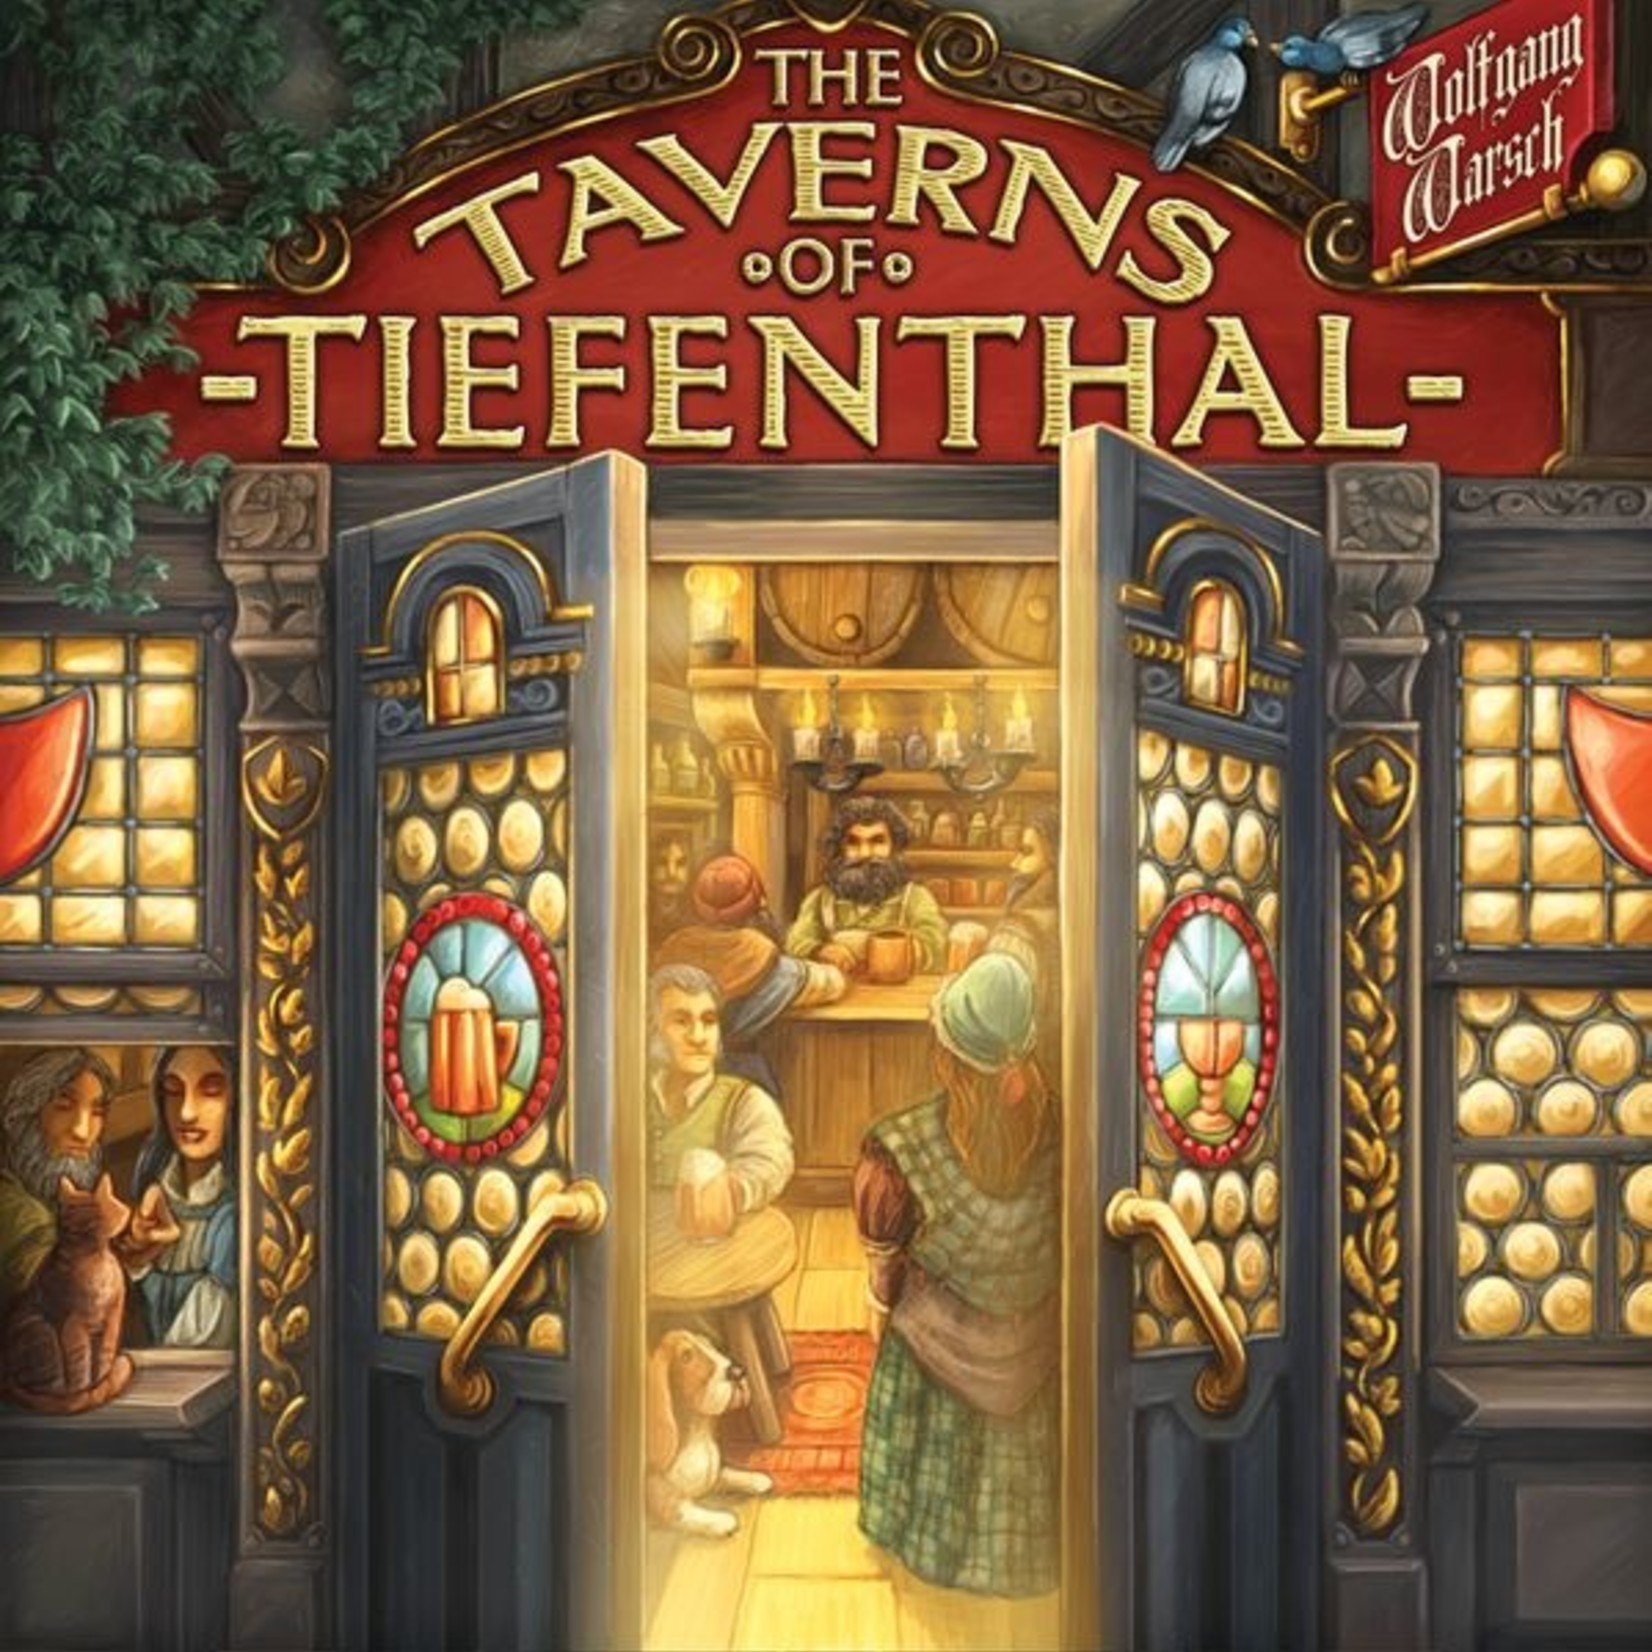 Palm Court Taverns of Tiefenthal